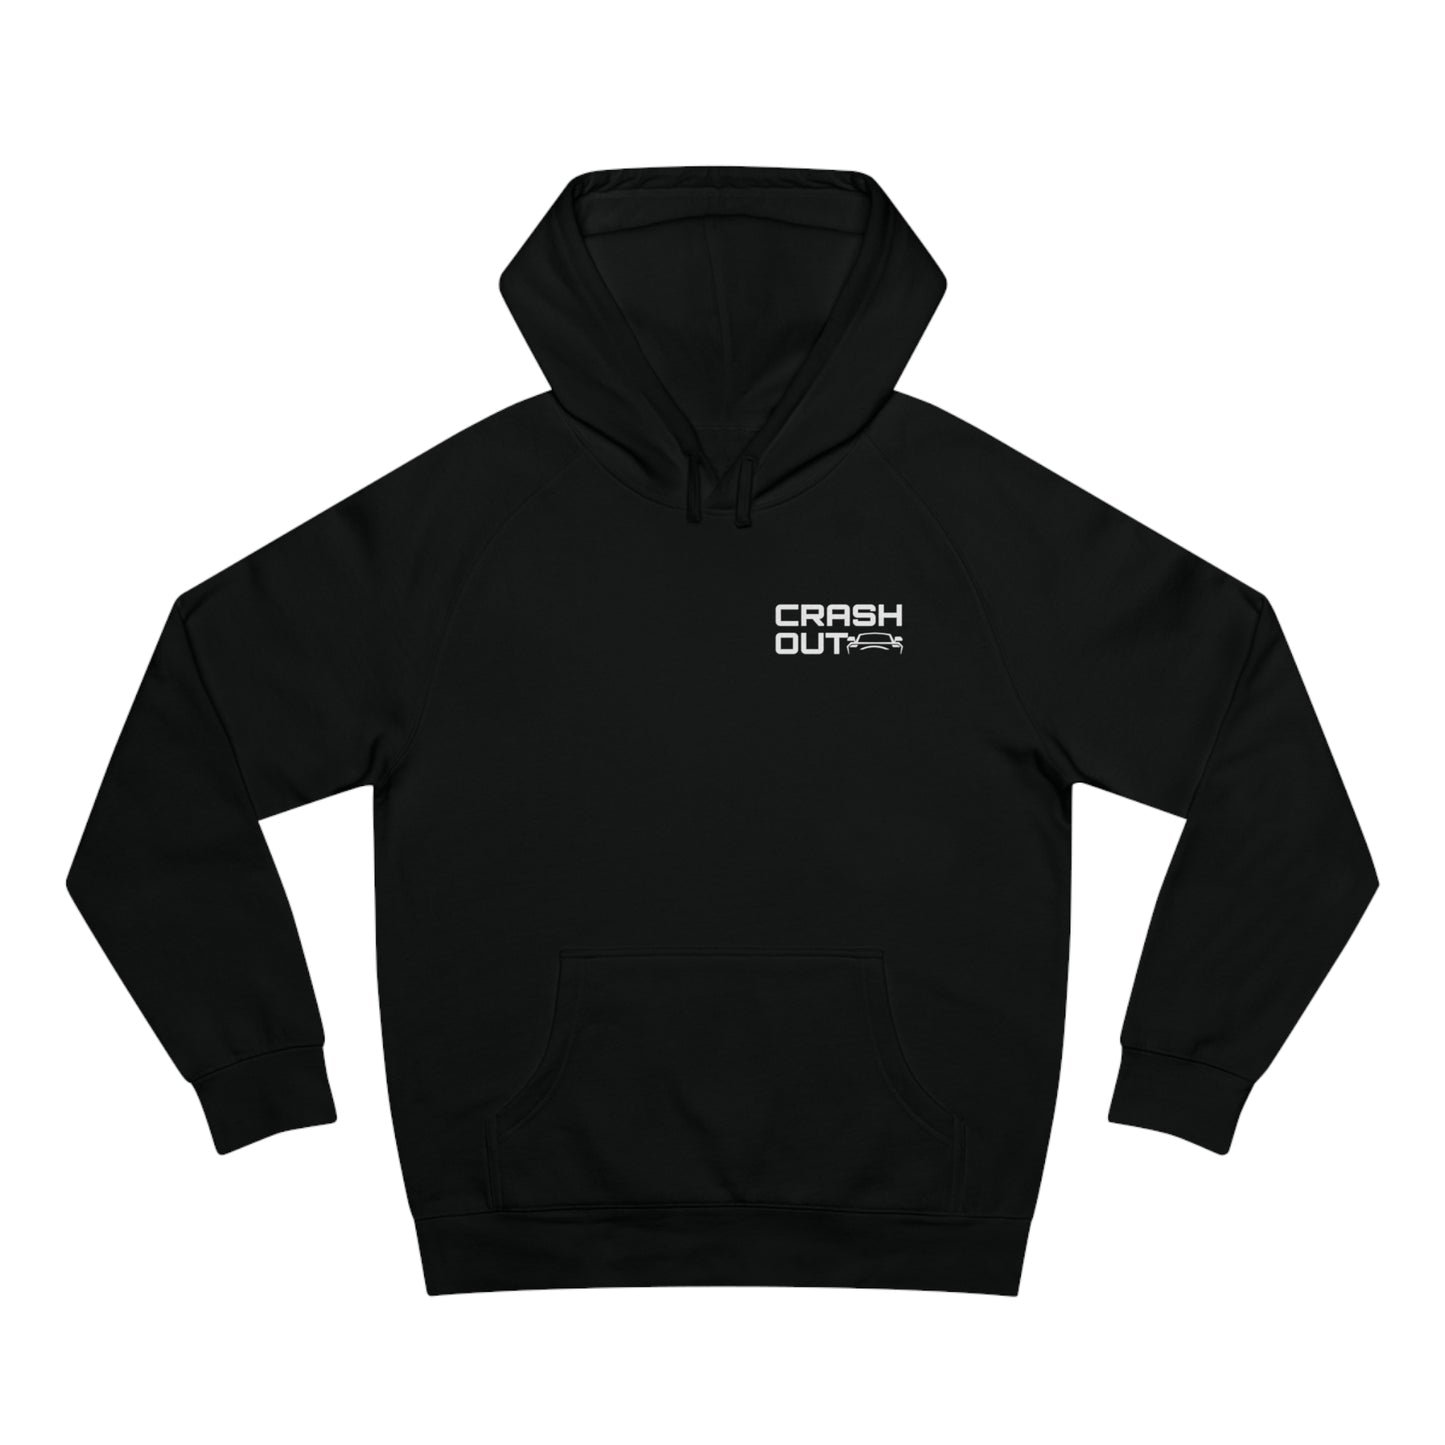 Remember The Goal Graphic Hoodie